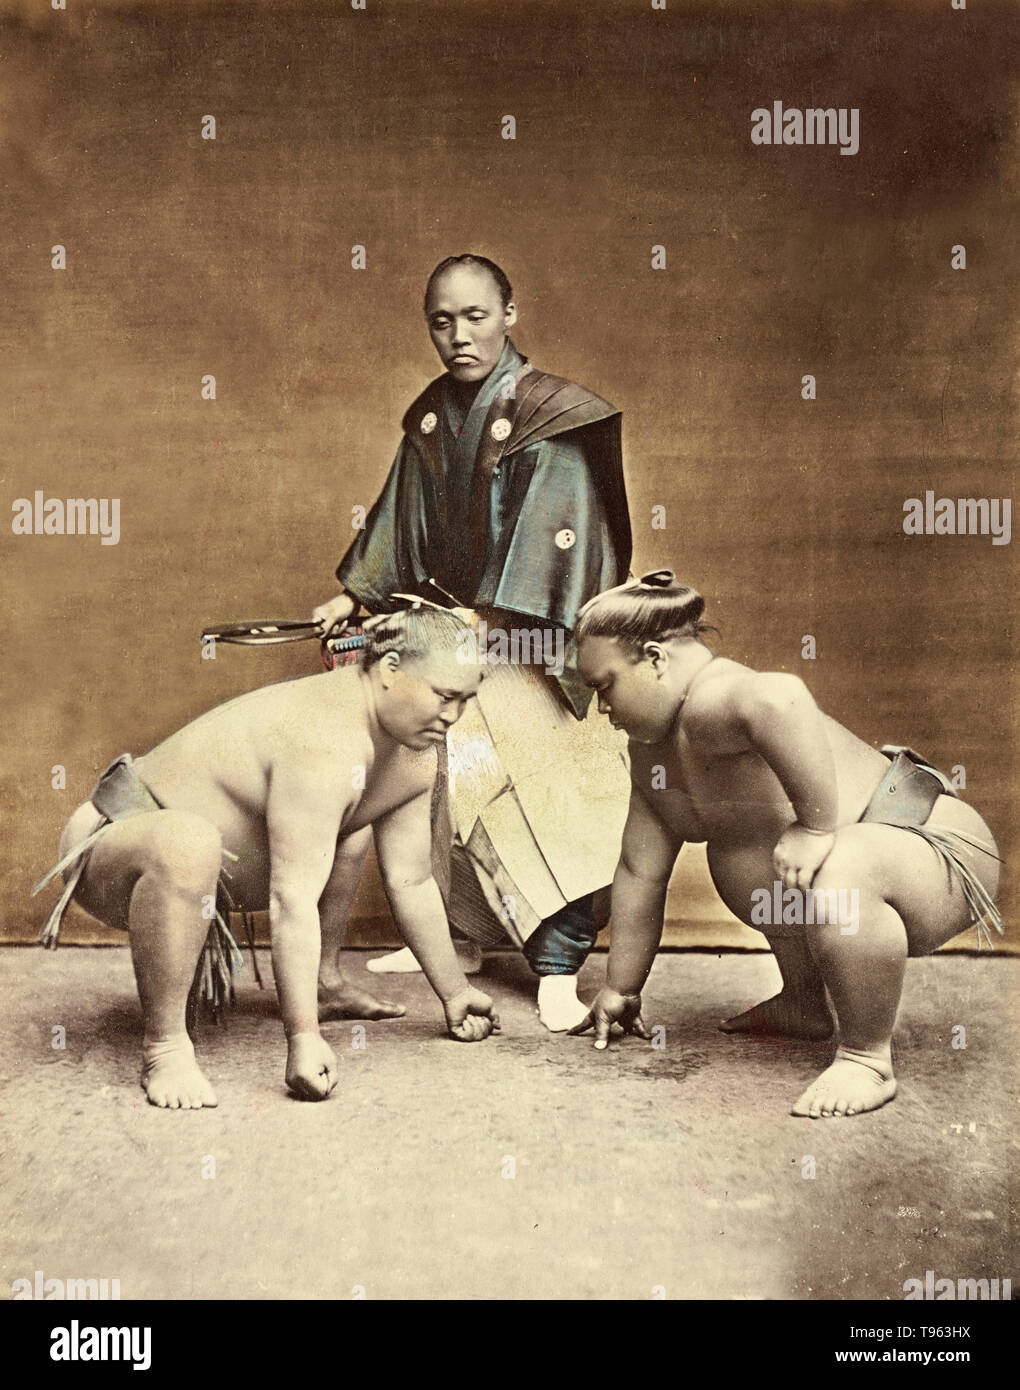 Sumo wrestlers. Kusakabe Kimbei (Japanese, 1841 - 1934). Taken c. 1870s - 1890s. Hand-colored albumen silver print. Professional sumo roots trace back to the 1600s in Japan. The original wrestlers were probably samurai without masters, who needed to find an alternative form of income. Current professional sumo tournaments began in the Tomioka Hachiman Shrine in 1684. Stock Photo